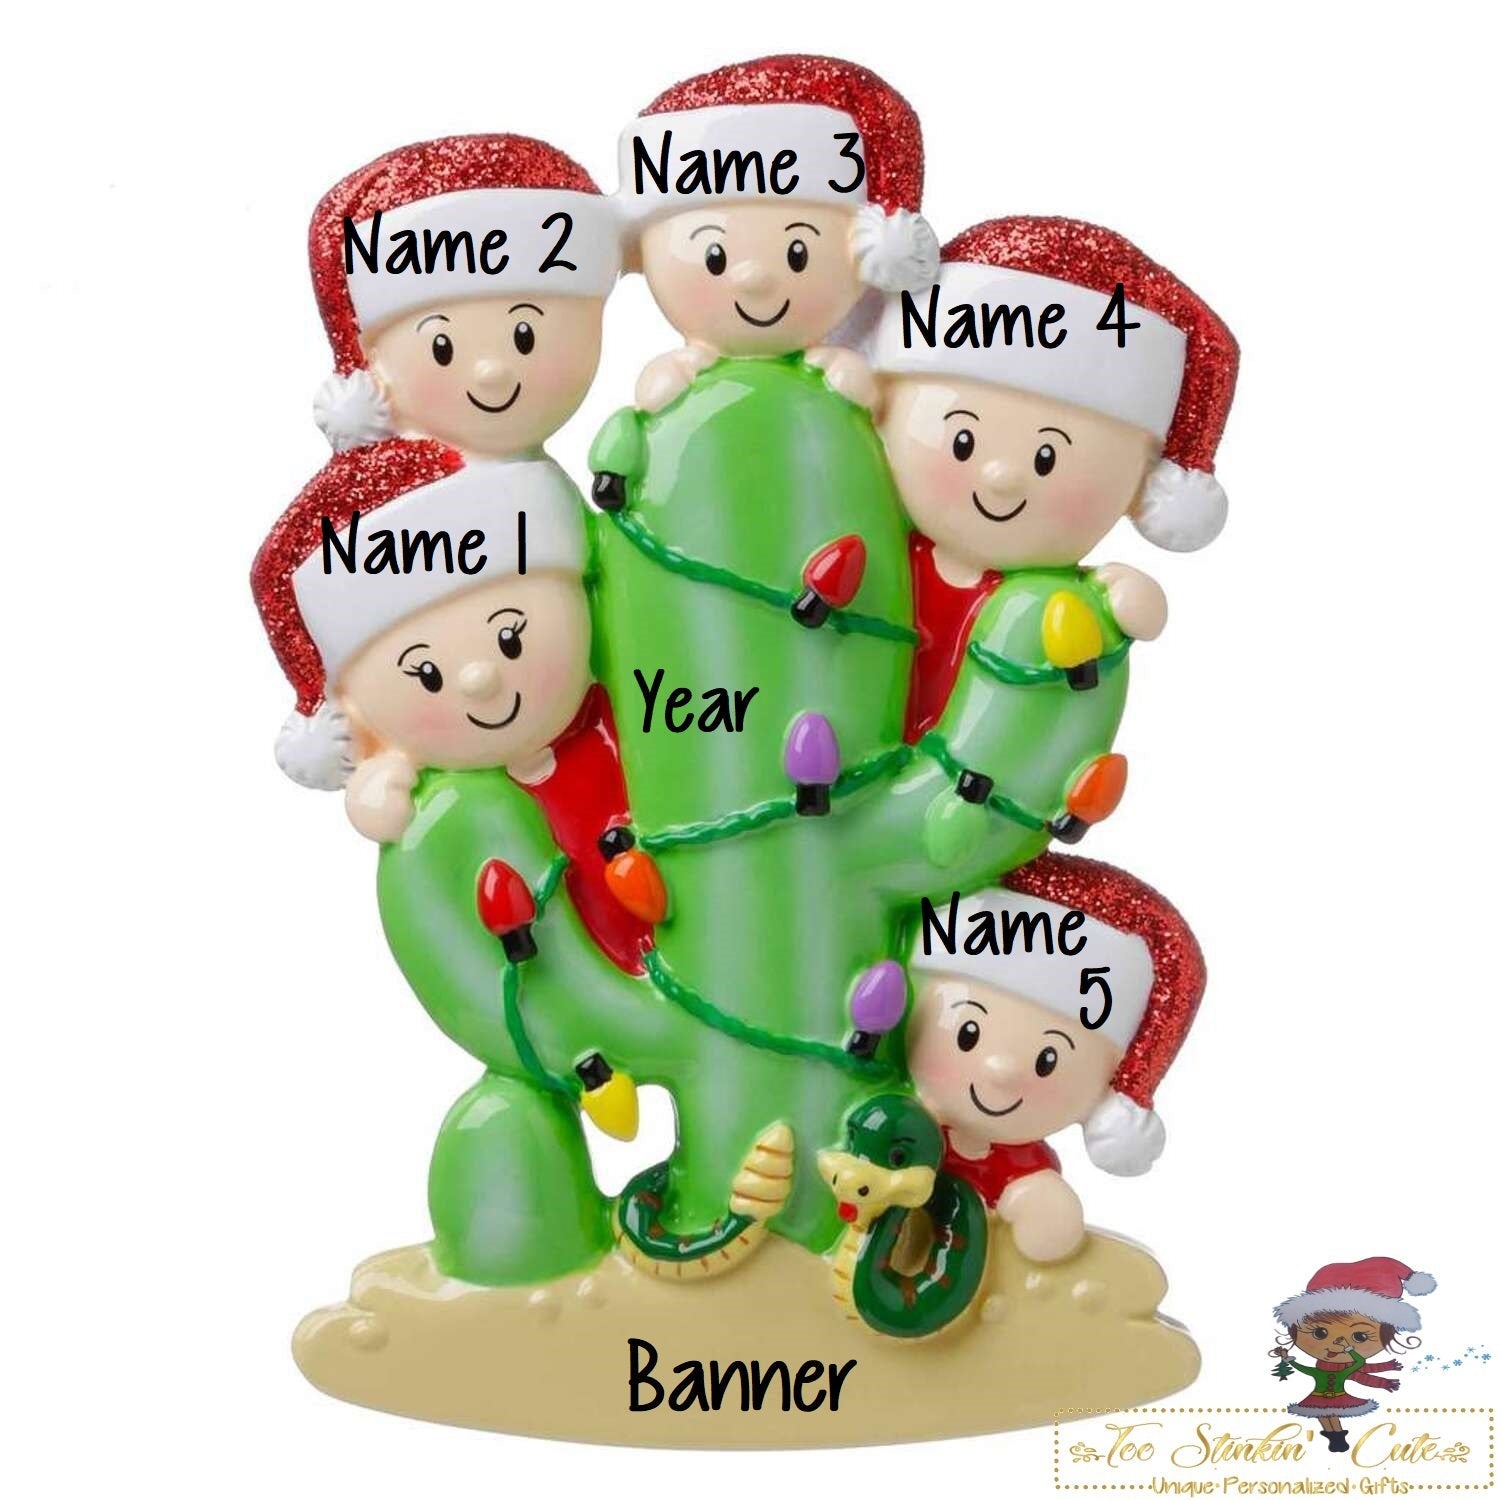 Christmas Ornament Cactus Family of 5/ Desert Couple Friends Coworkers Employees - Personalized + Free Shipping!